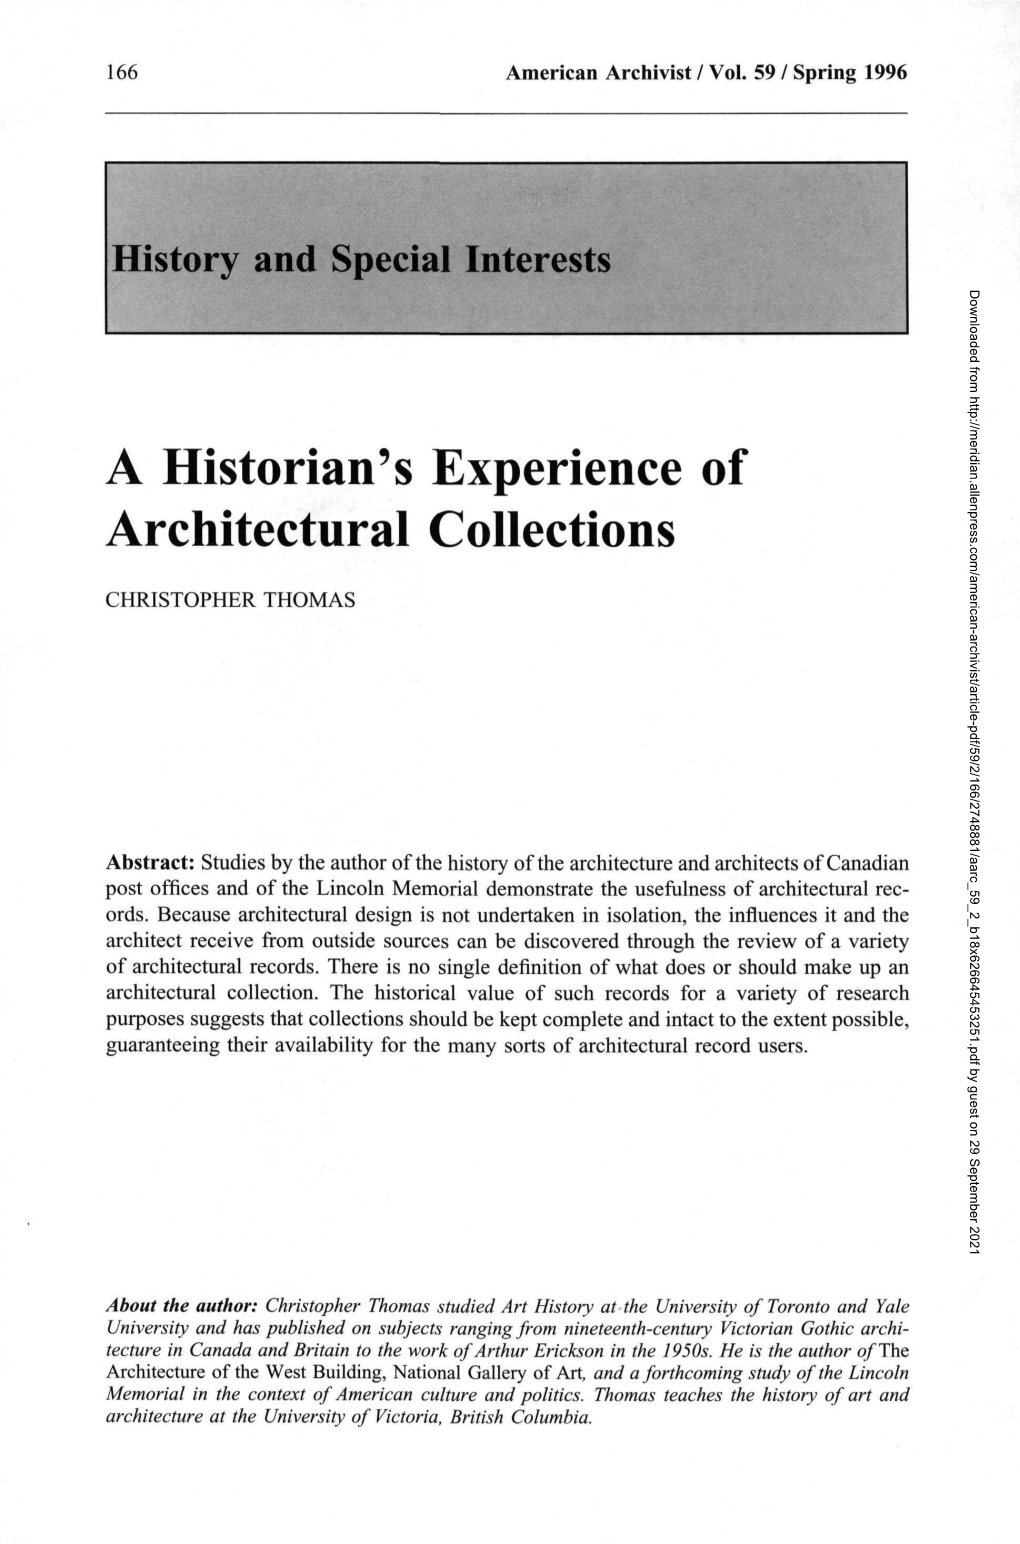 A Historian's Experience of Architectural Collections